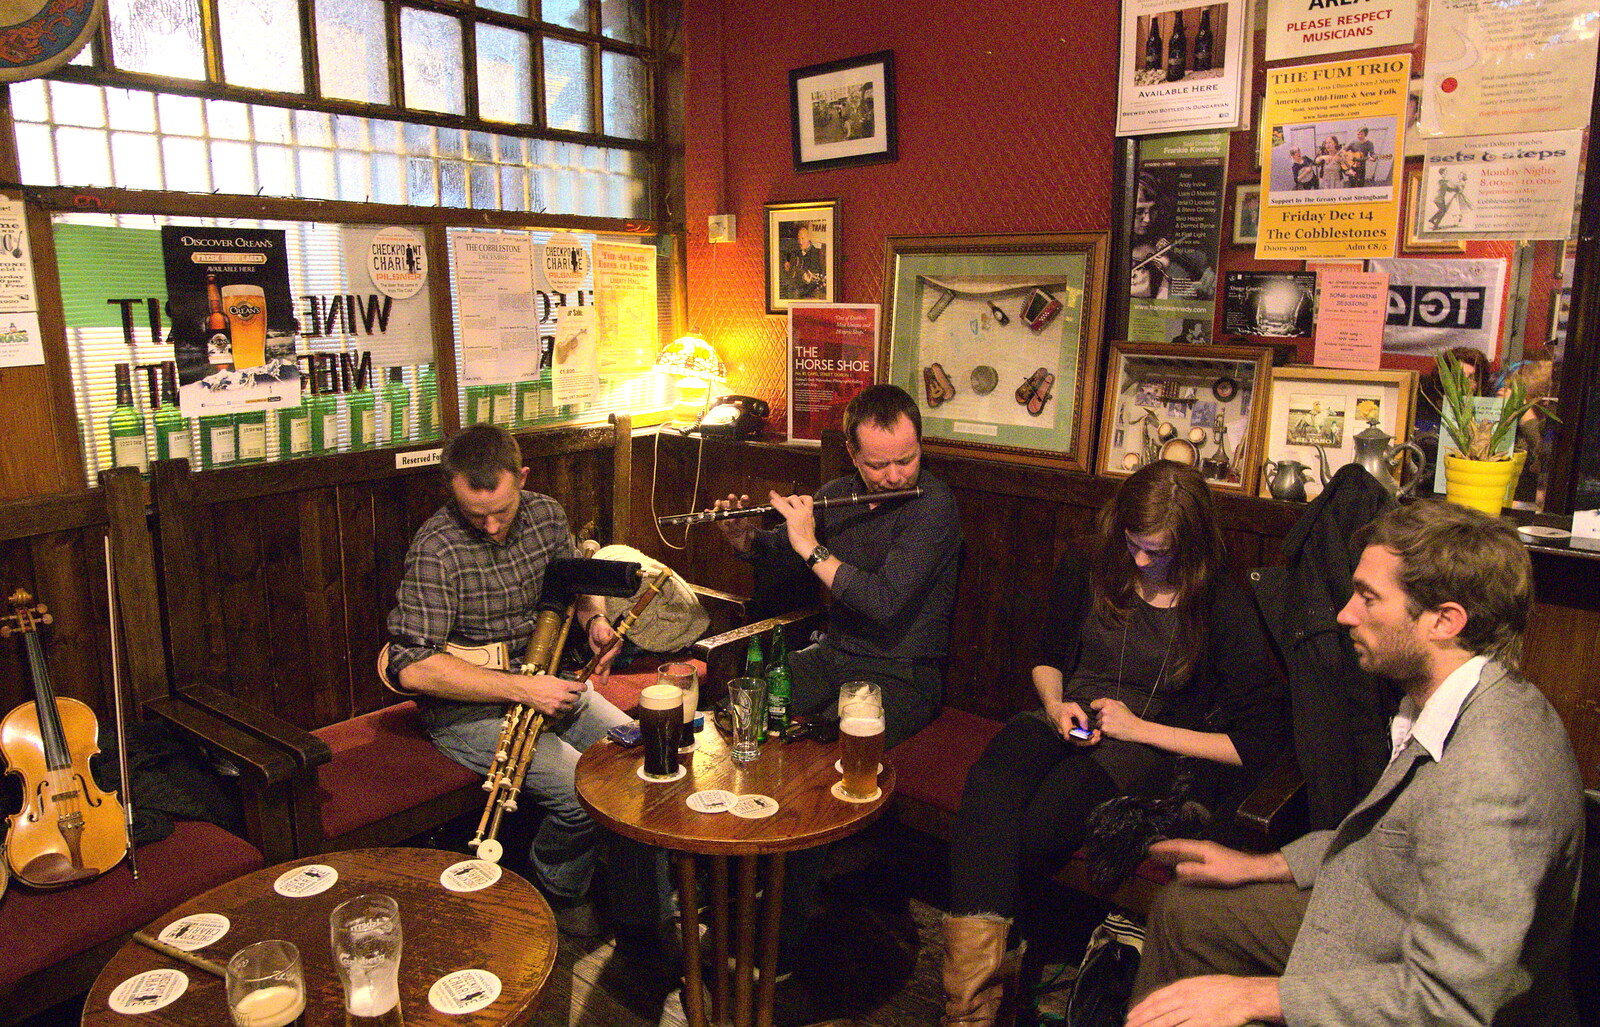 More pipe and flute trad playing from A Night on the Lash, Dublin, Ireland - 14th December 2012